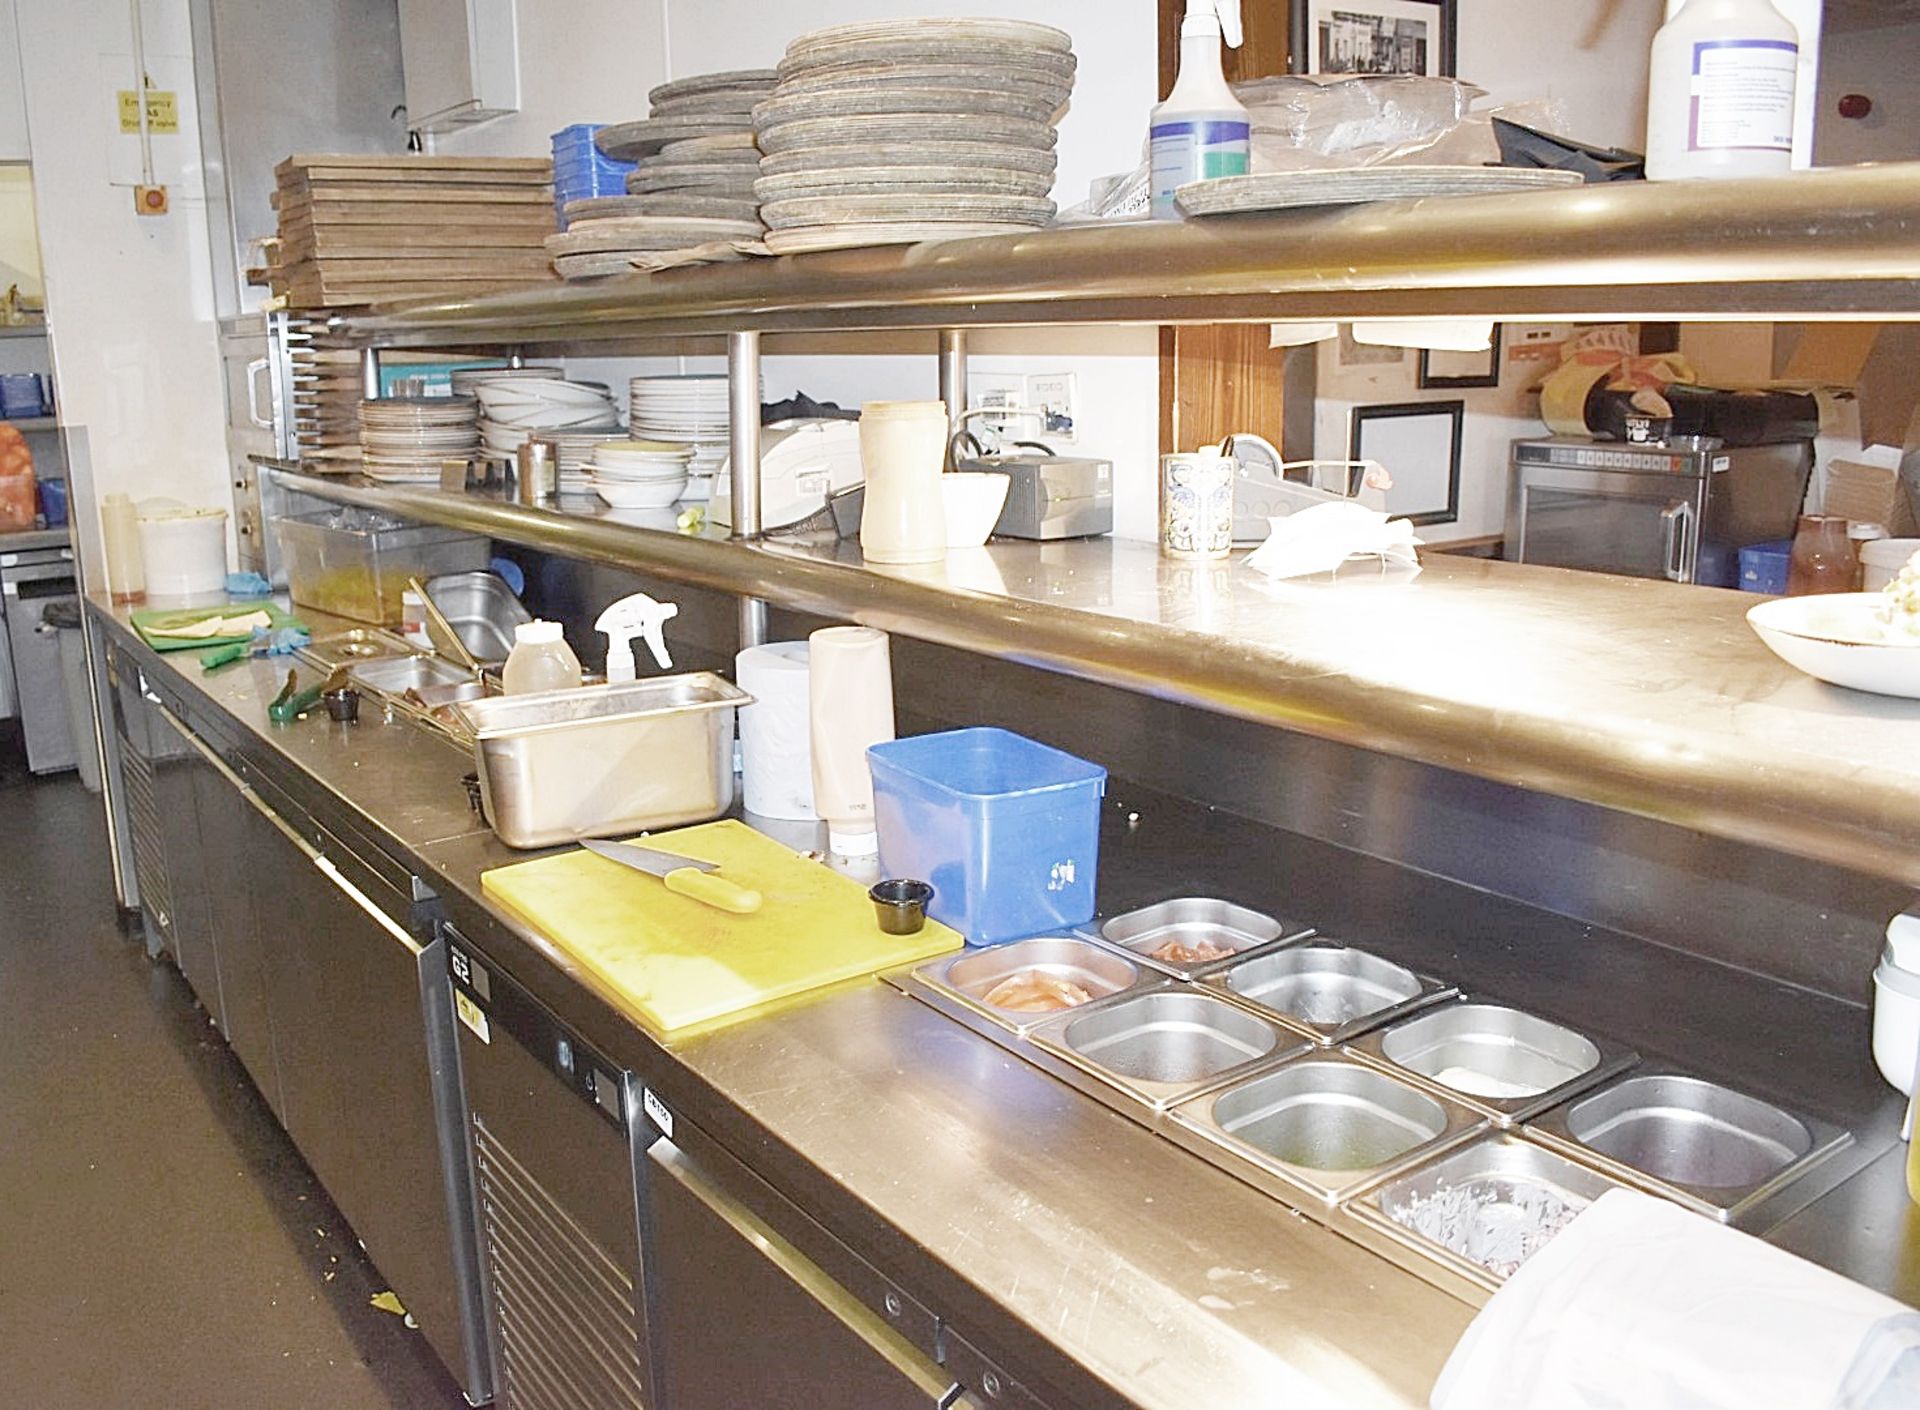 1 x Stainless Steel Preparation / Serving Area - Features Fryers, Gasto Pans, Counters, Shelving - Image 14 of 15